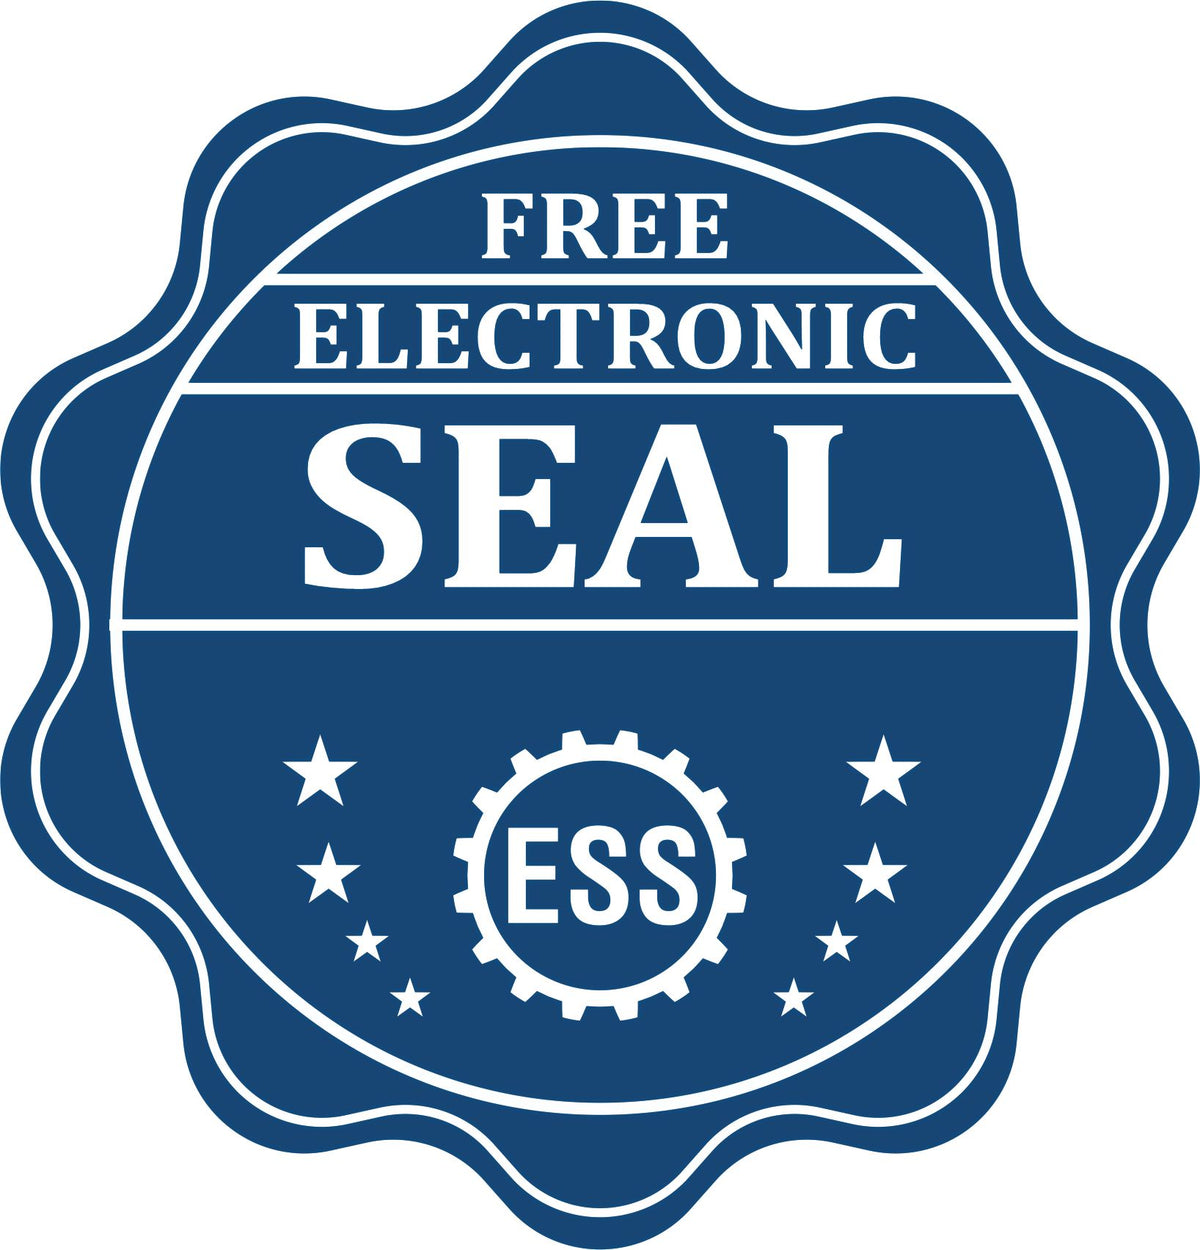 A badge showing a free electronic seal for the Extended Long Reach Nevada Surveyor Embosser with stars and the ESS gear on the emblem.